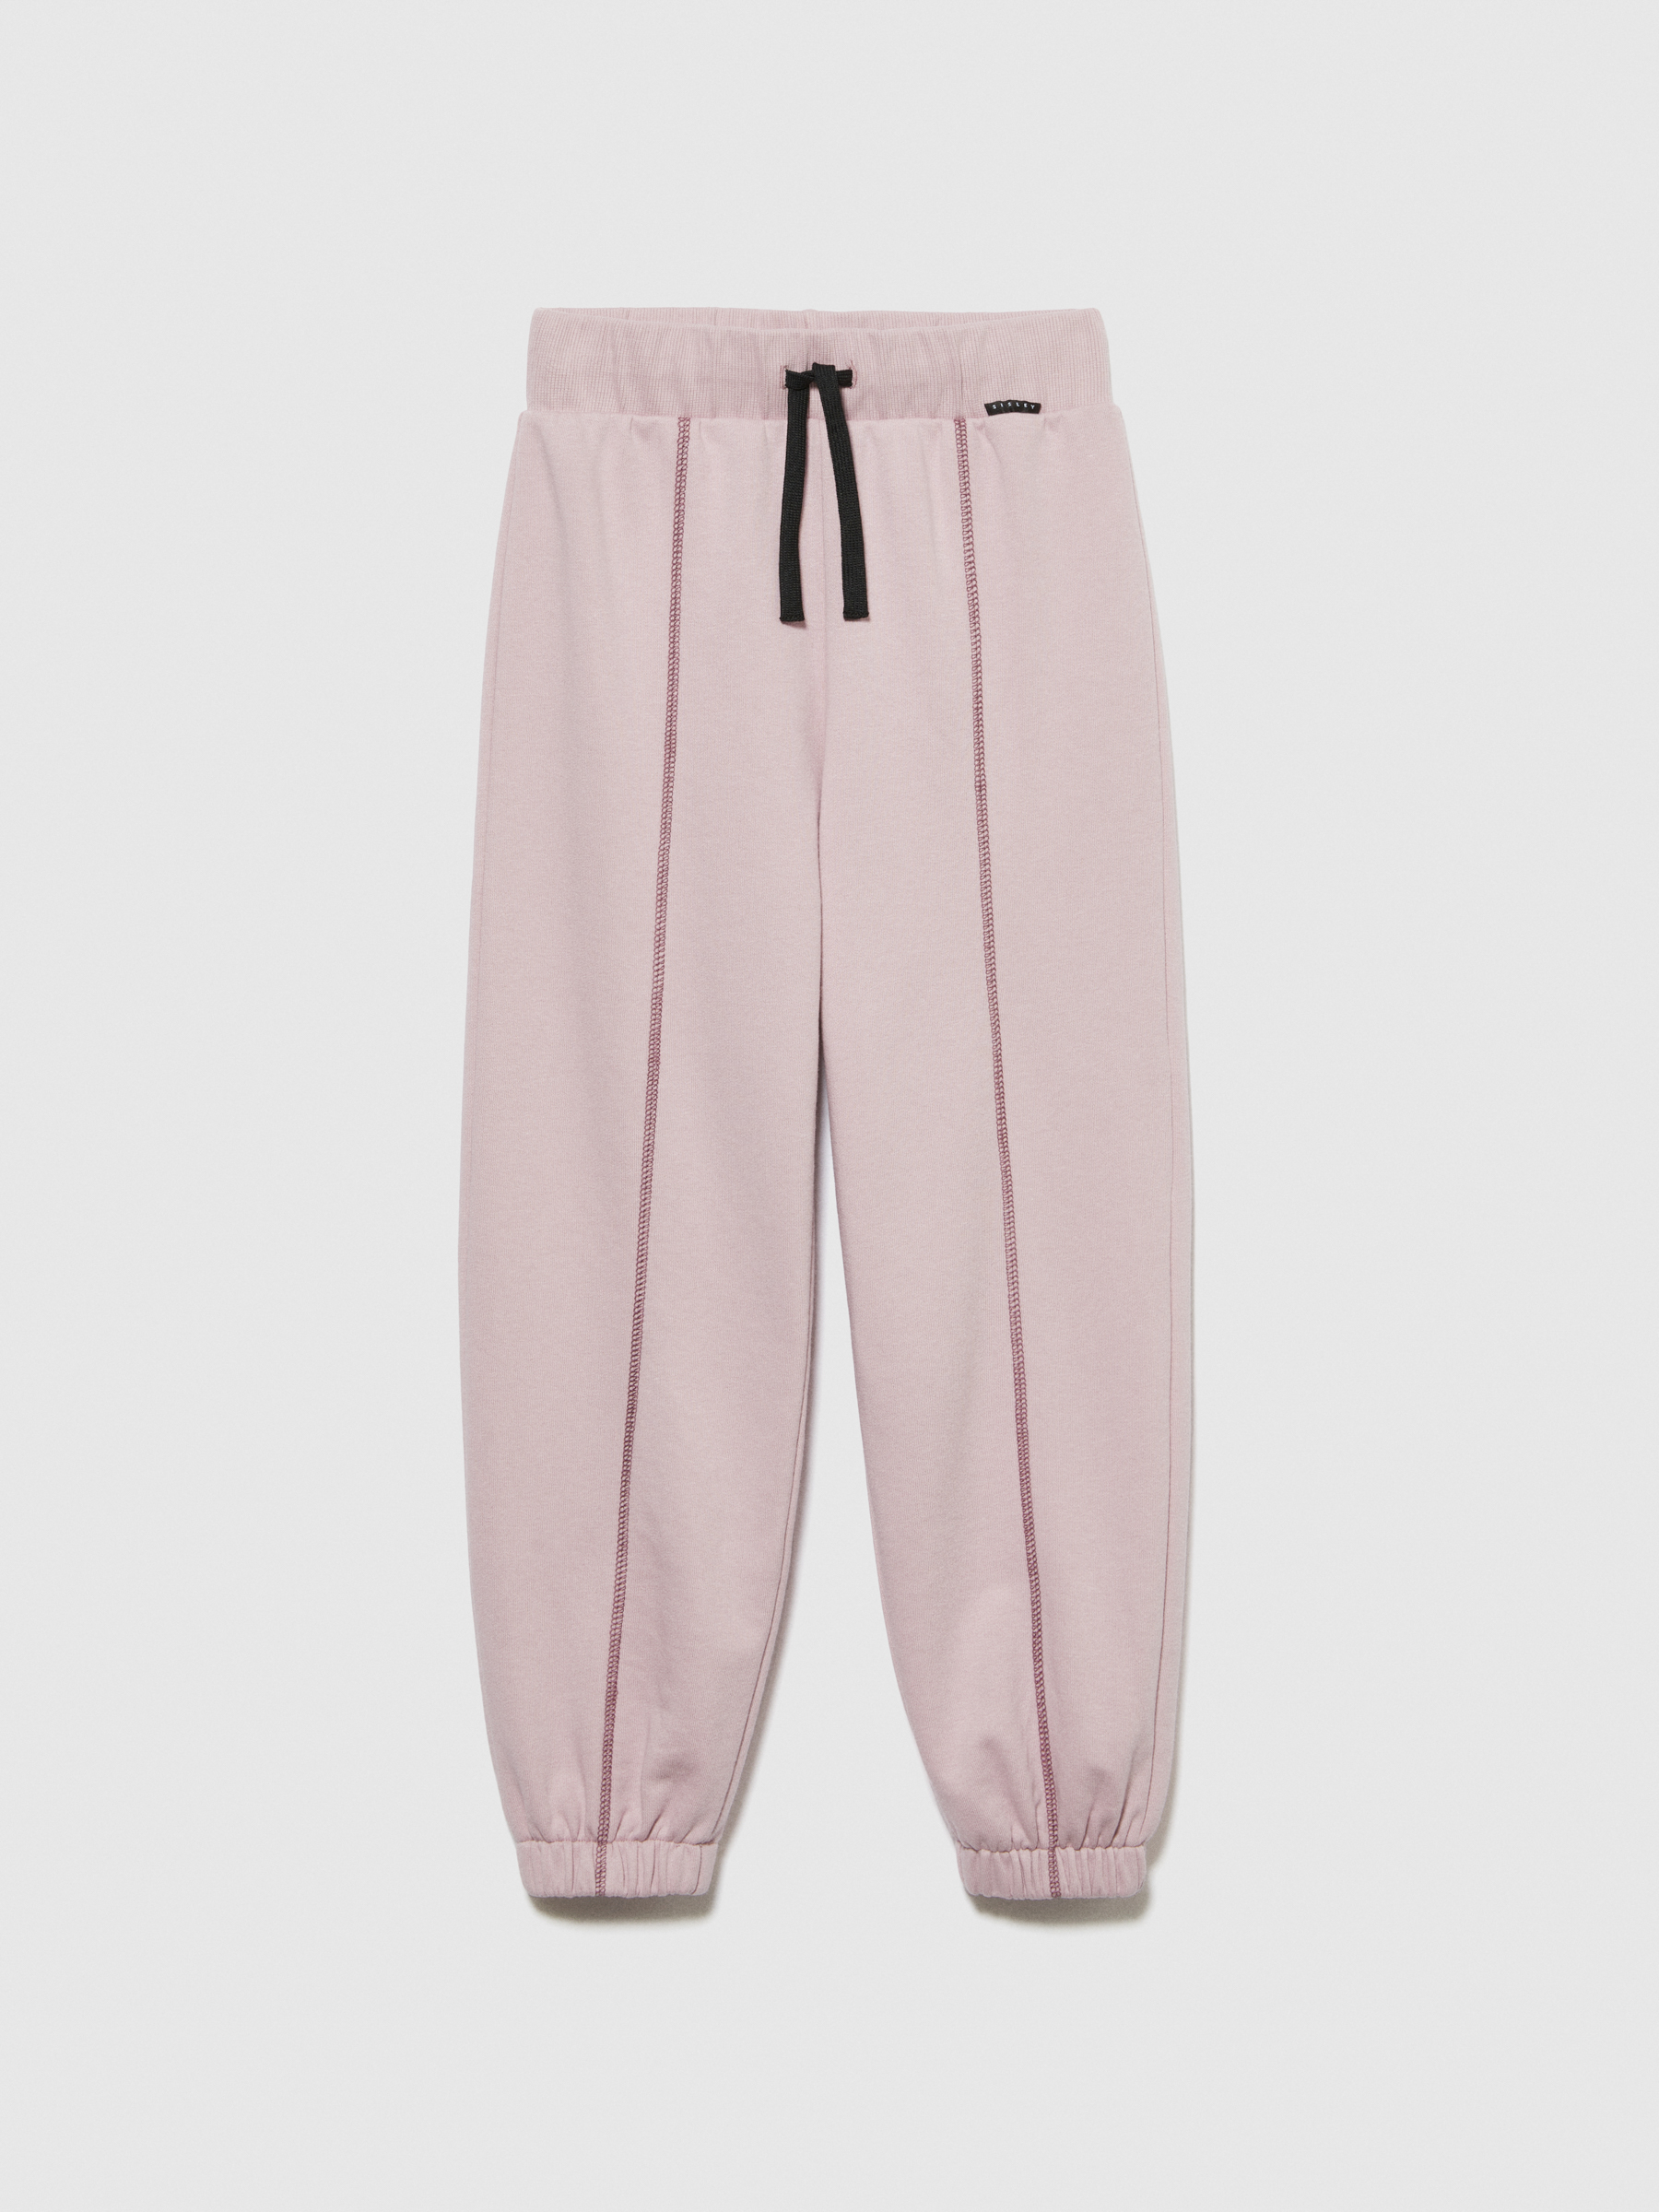 Sisley Young - Oversized Fit Joggers, Woman, Pink, Size: M